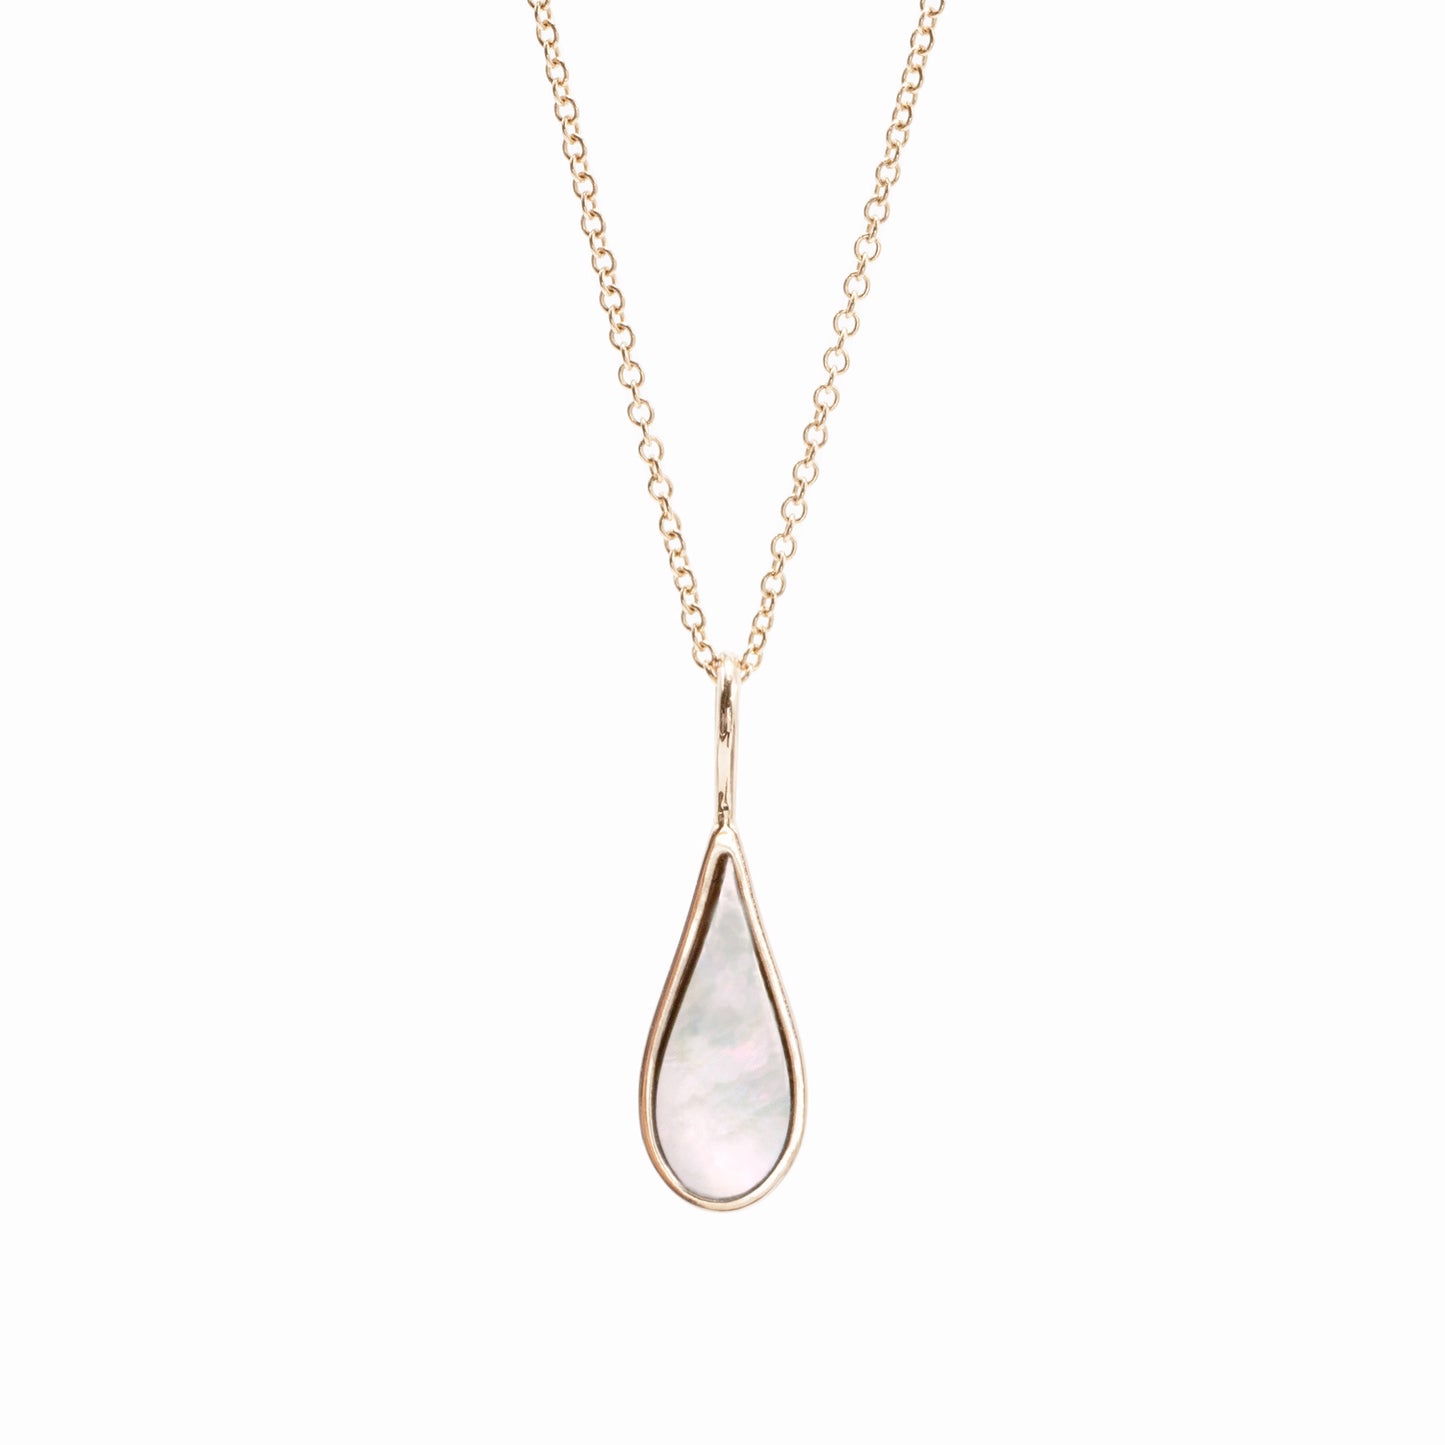 FINAL SALE WaterDrop 16mm Mother-of-Pearl Pendant Necklace in Rose Gold